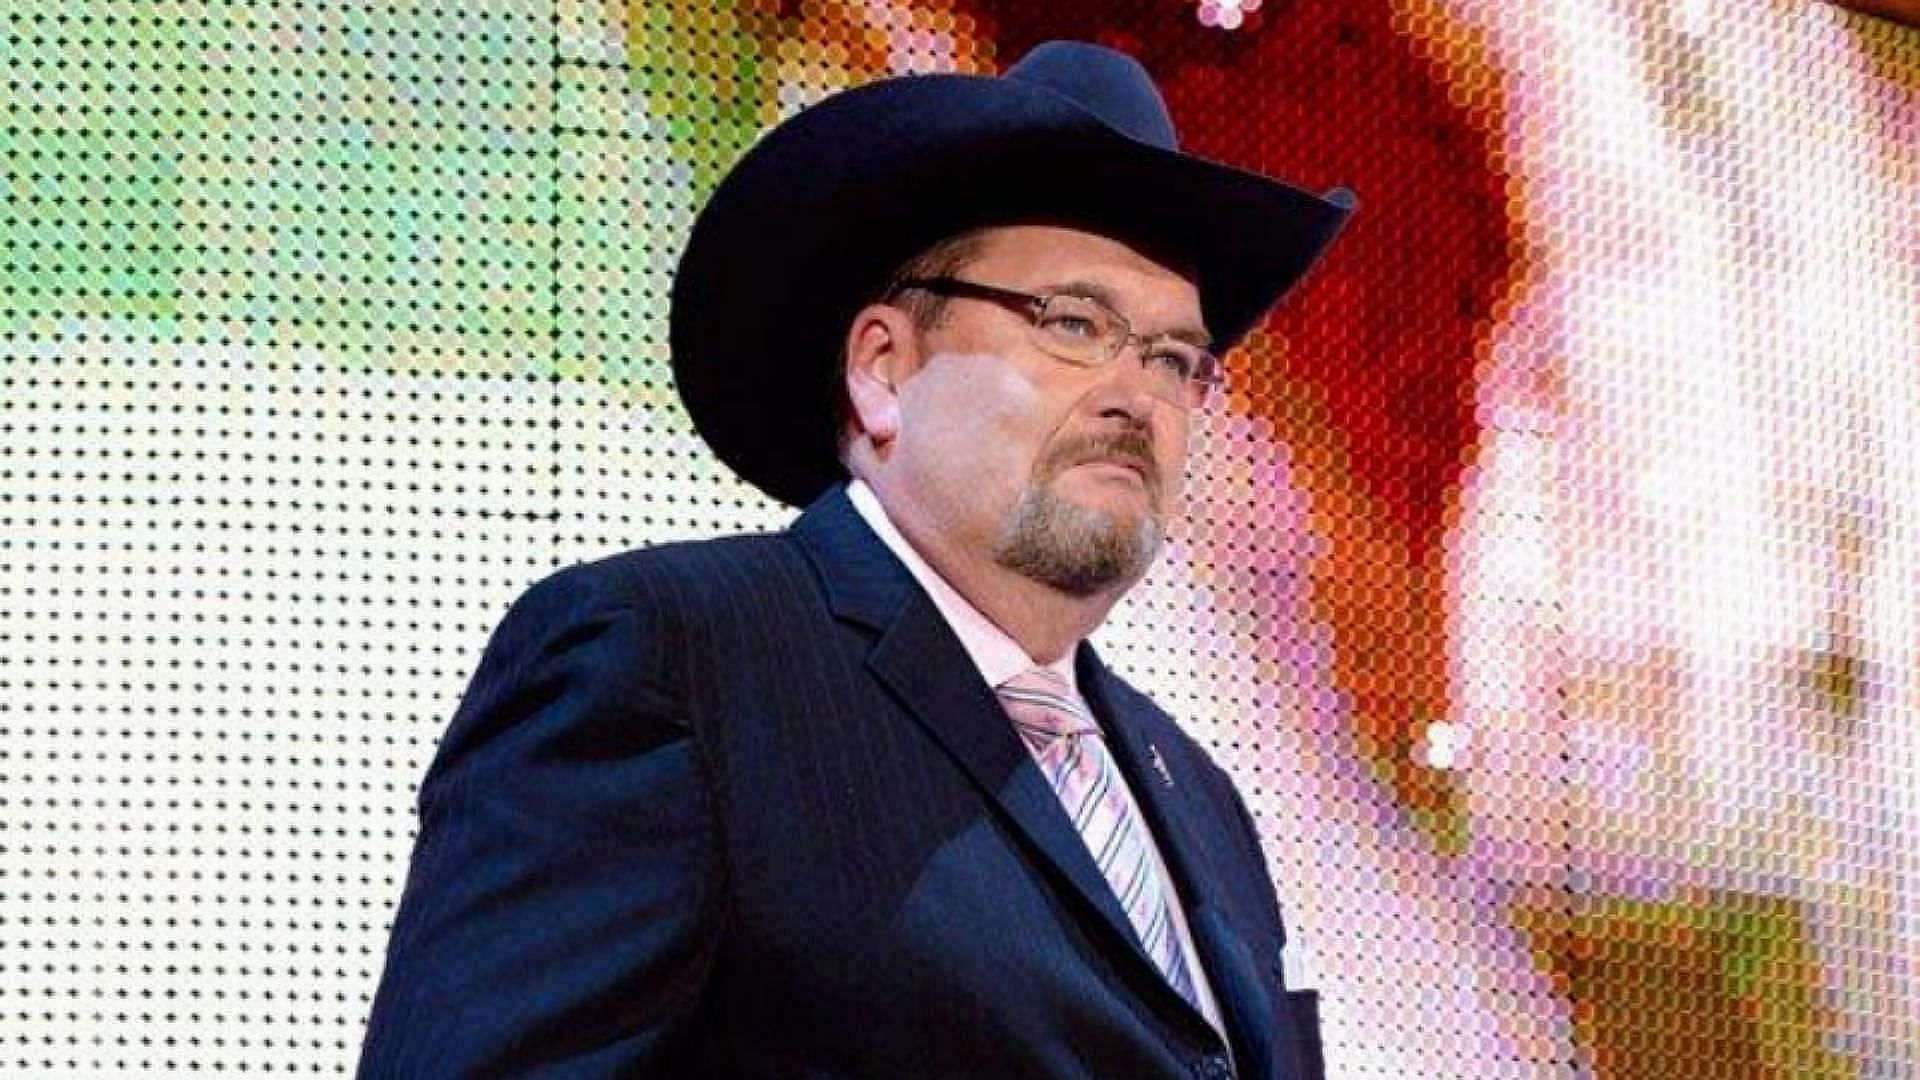 Jim Ross was inducted into the WWE Hall of Fame in 2007